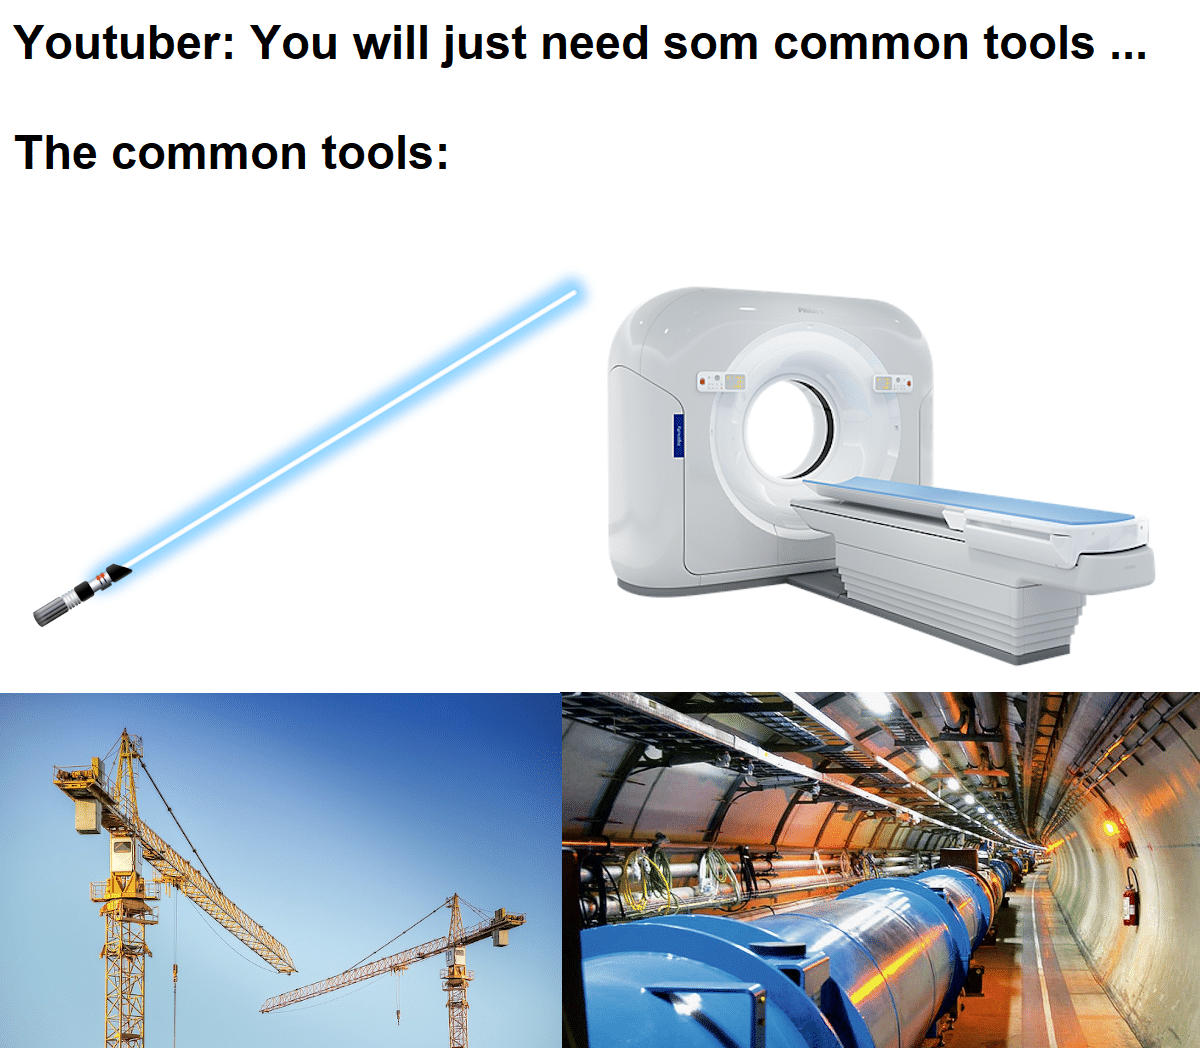 Dank, MRI, LHC, Hadron Collider, CERN, YouTube Dank Memes Dank, MRI, LHC, Hadron Collider, CERN, YouTube text: Youtuber: You will just need som common tools ... The common tools: 